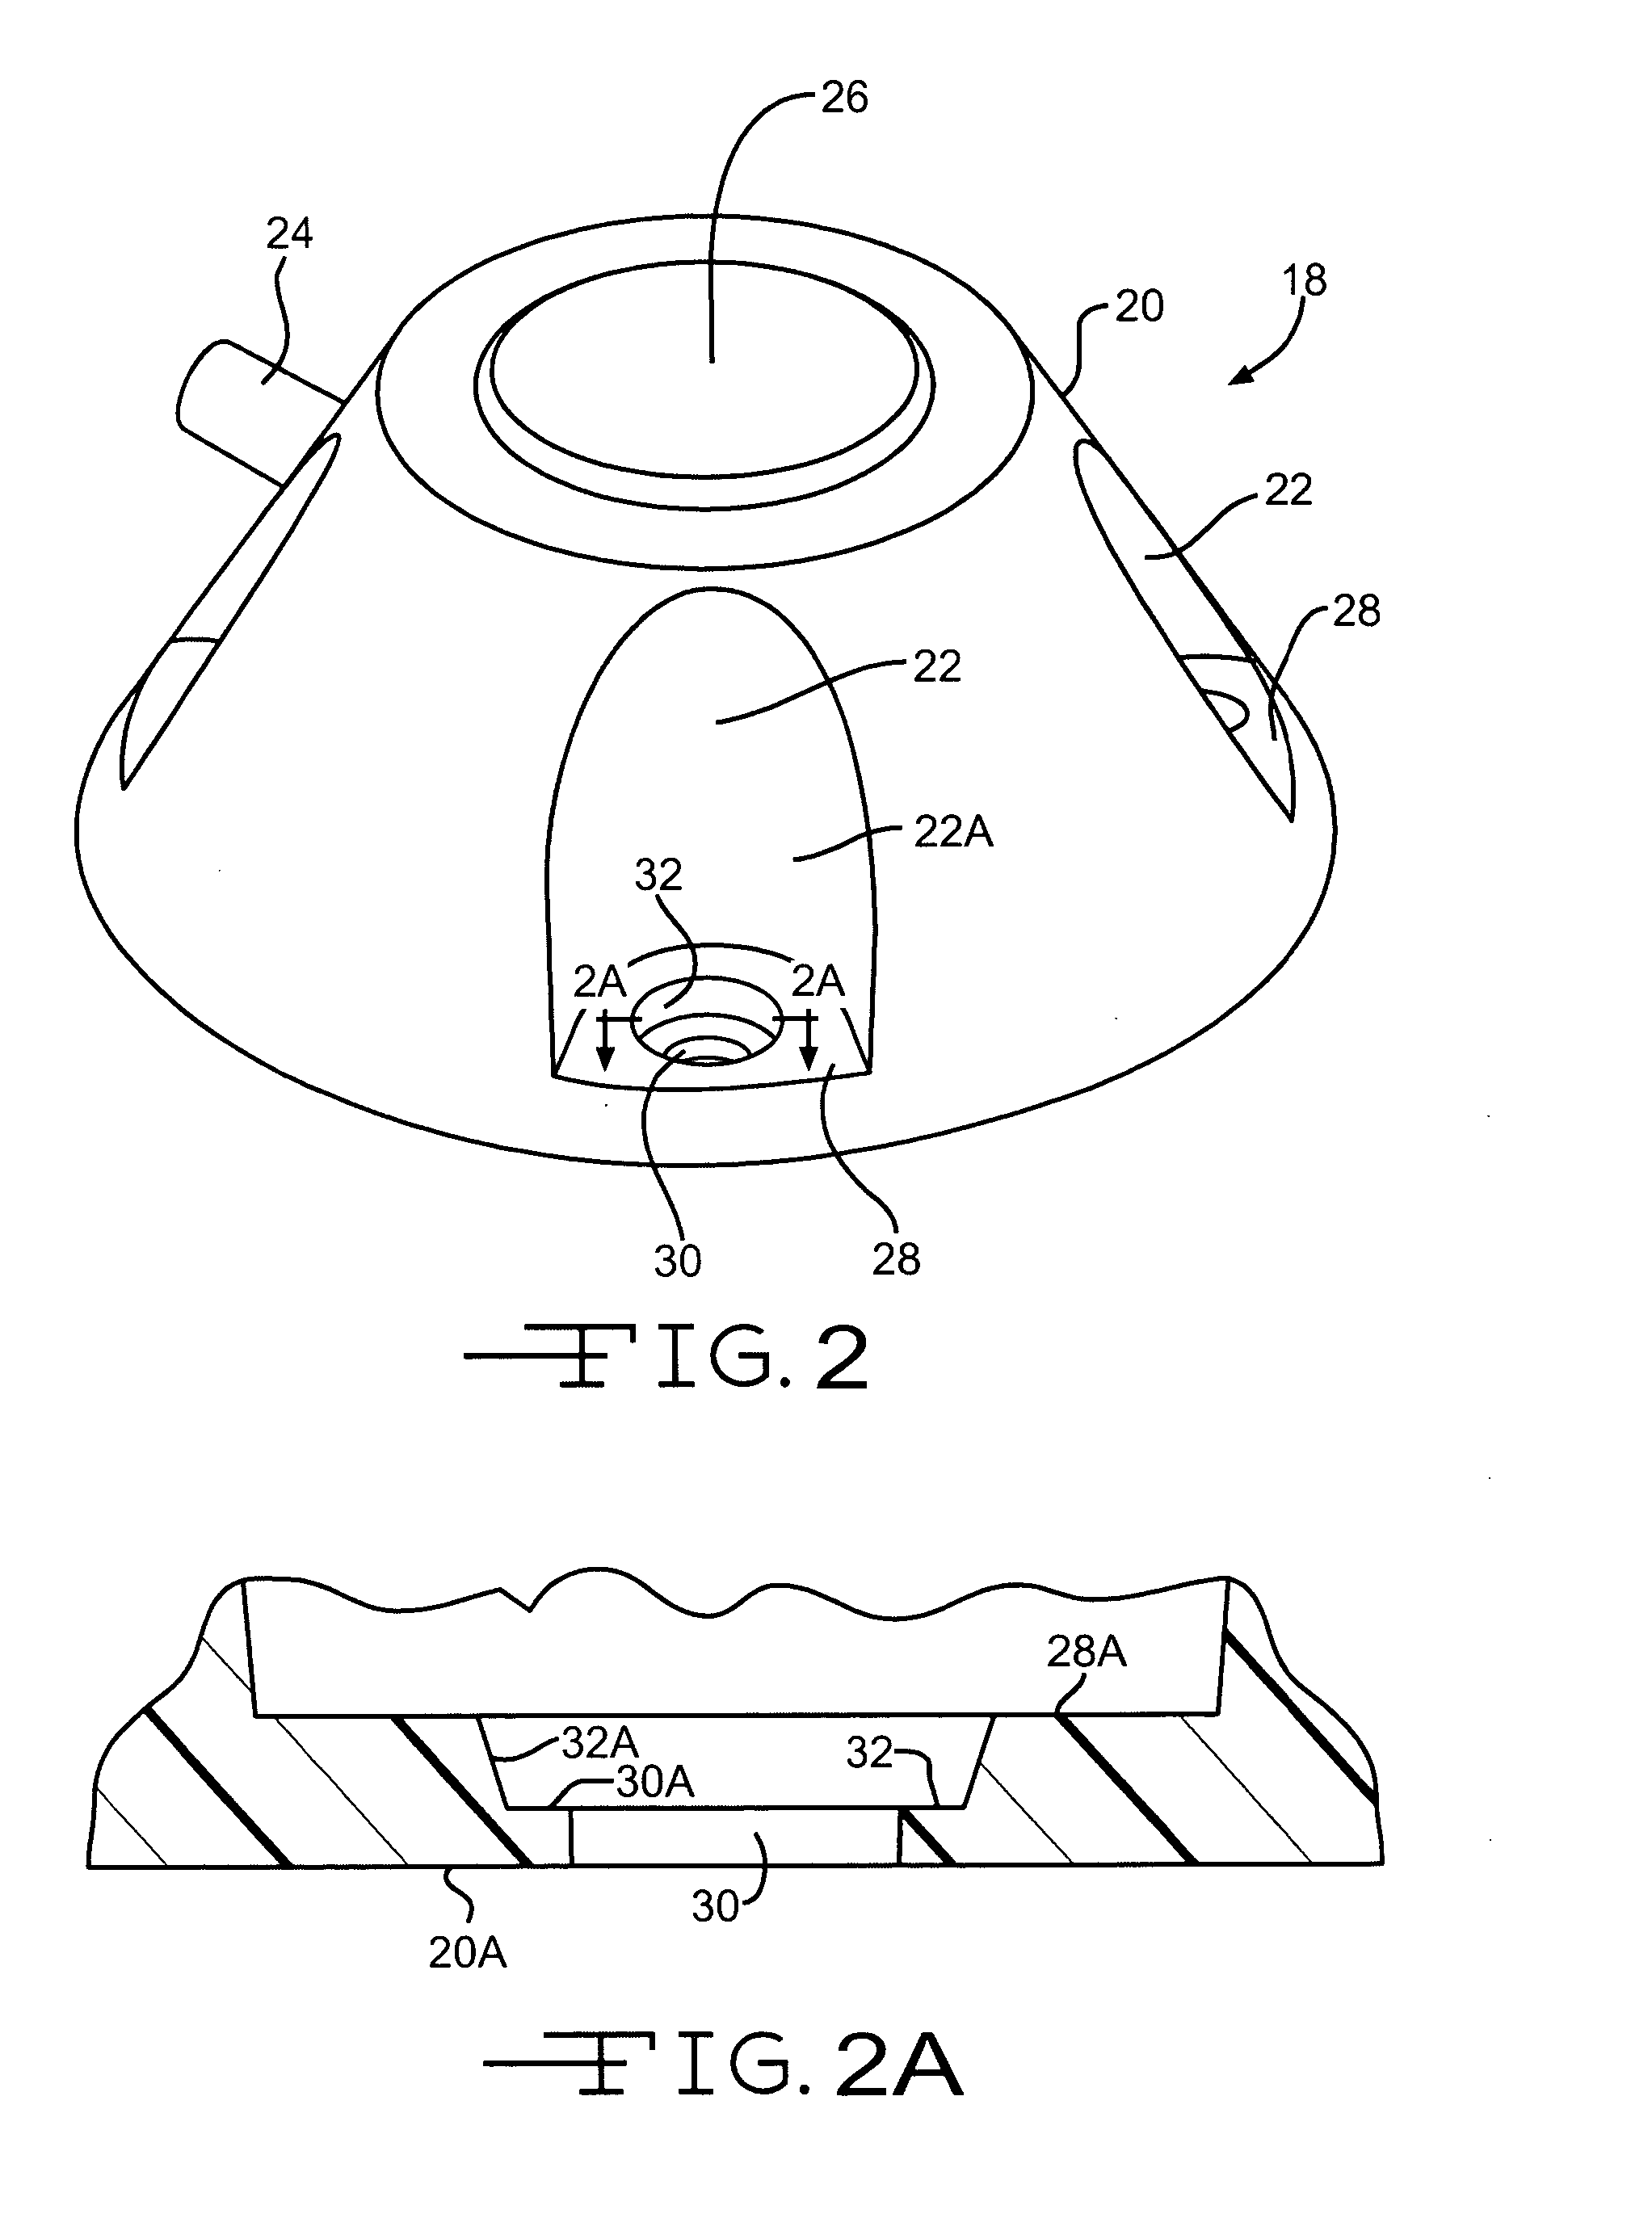 Subcutaneous injection port for applied fasteners